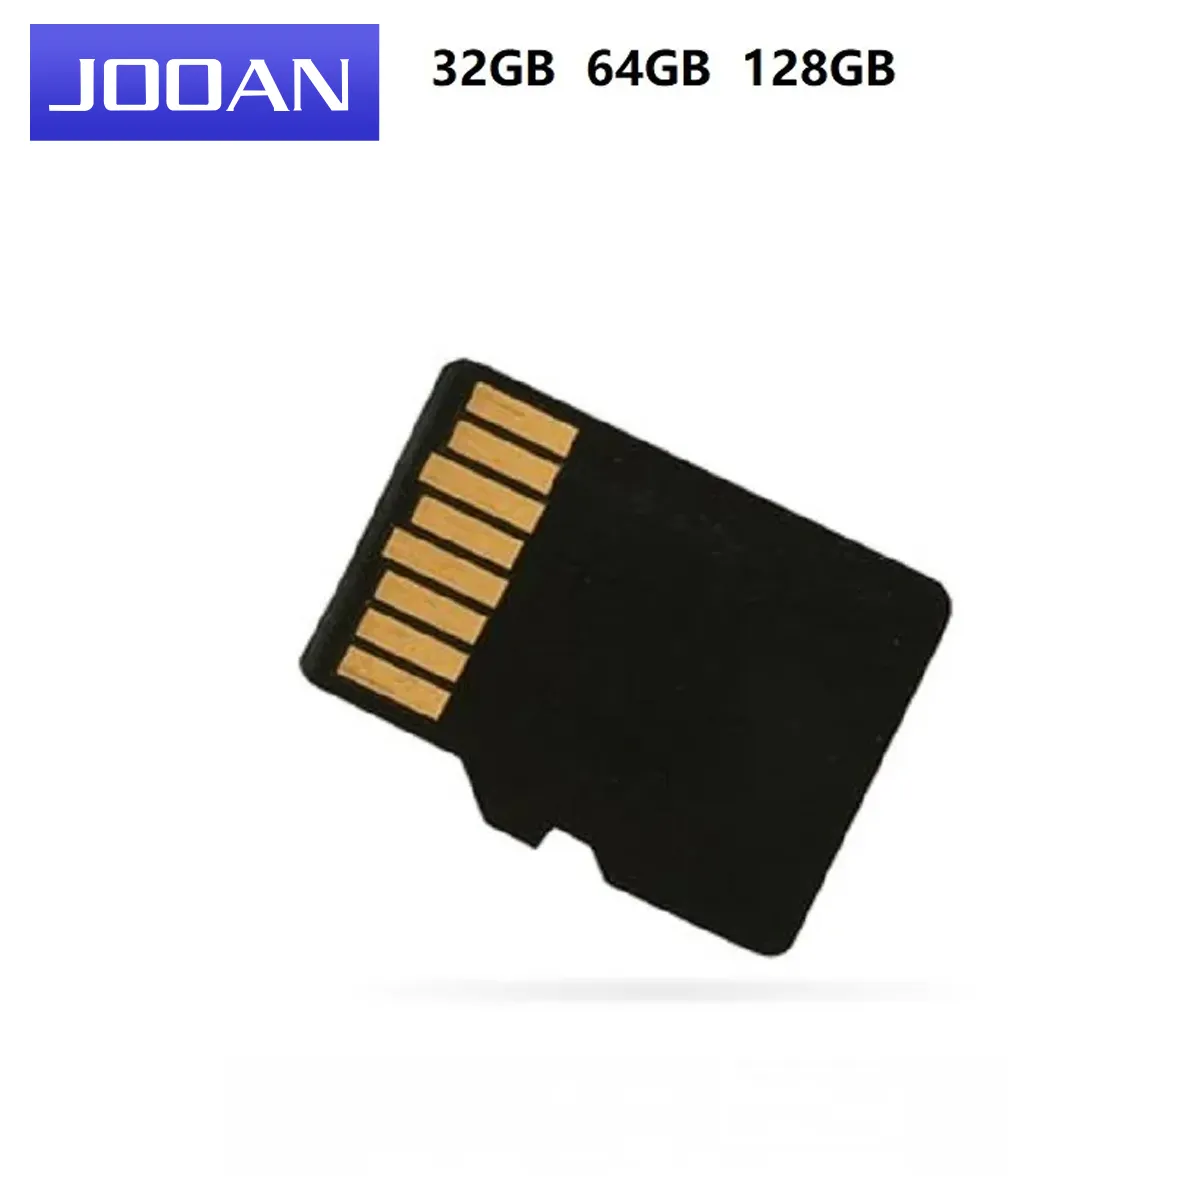 JOOAN Flash Card Video Record Memory Card 32GB 64GB 128G Microsd SD Cards For IP Camera Wifi Camera Home Security Surveillance